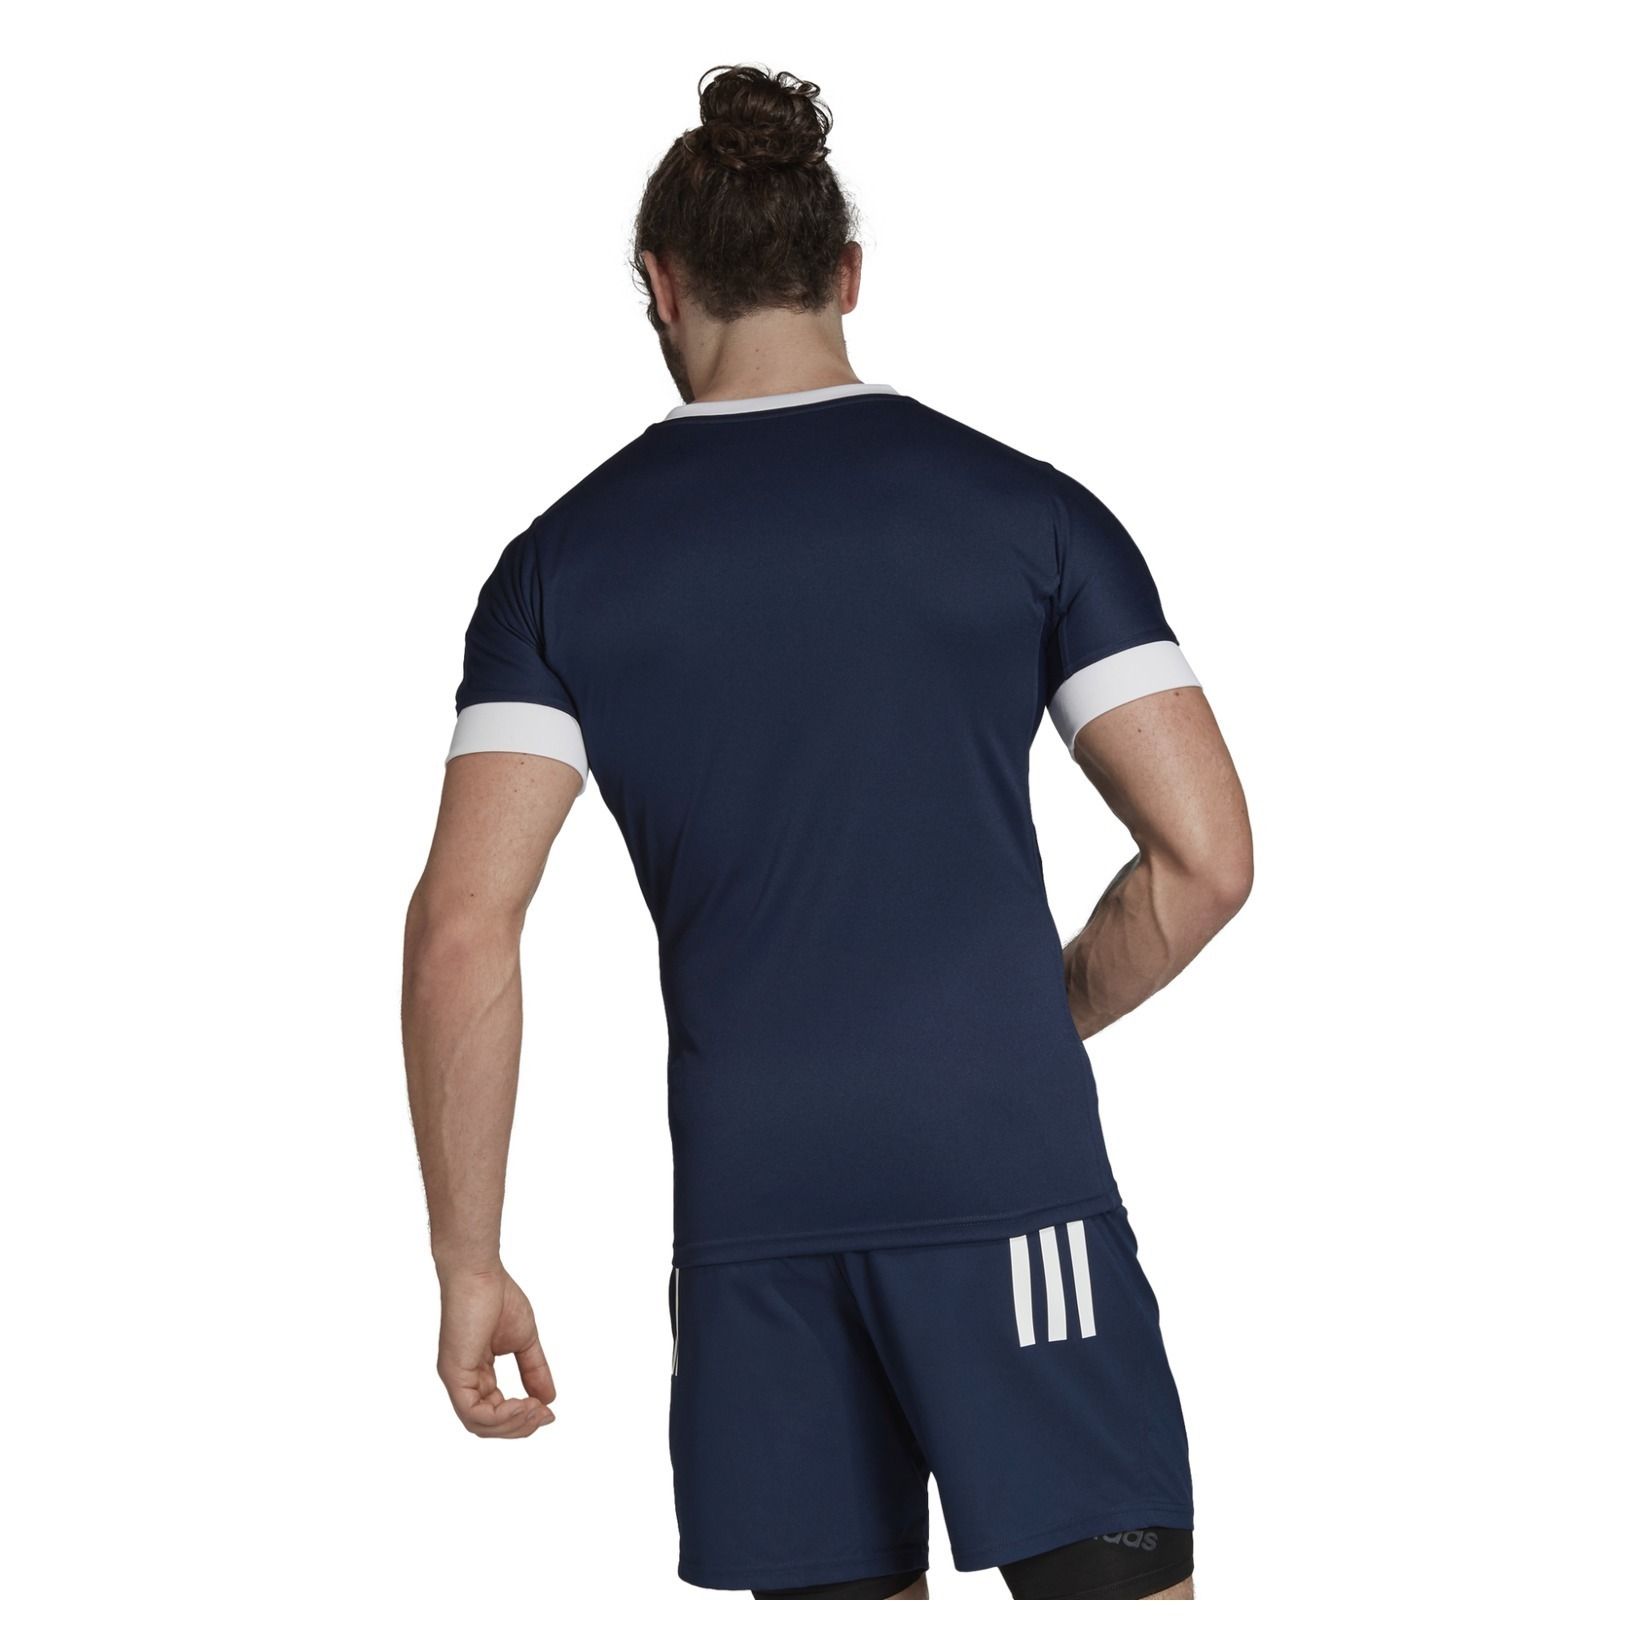 Adidas-LP 3 Stripes Fitted Rugby Jersey